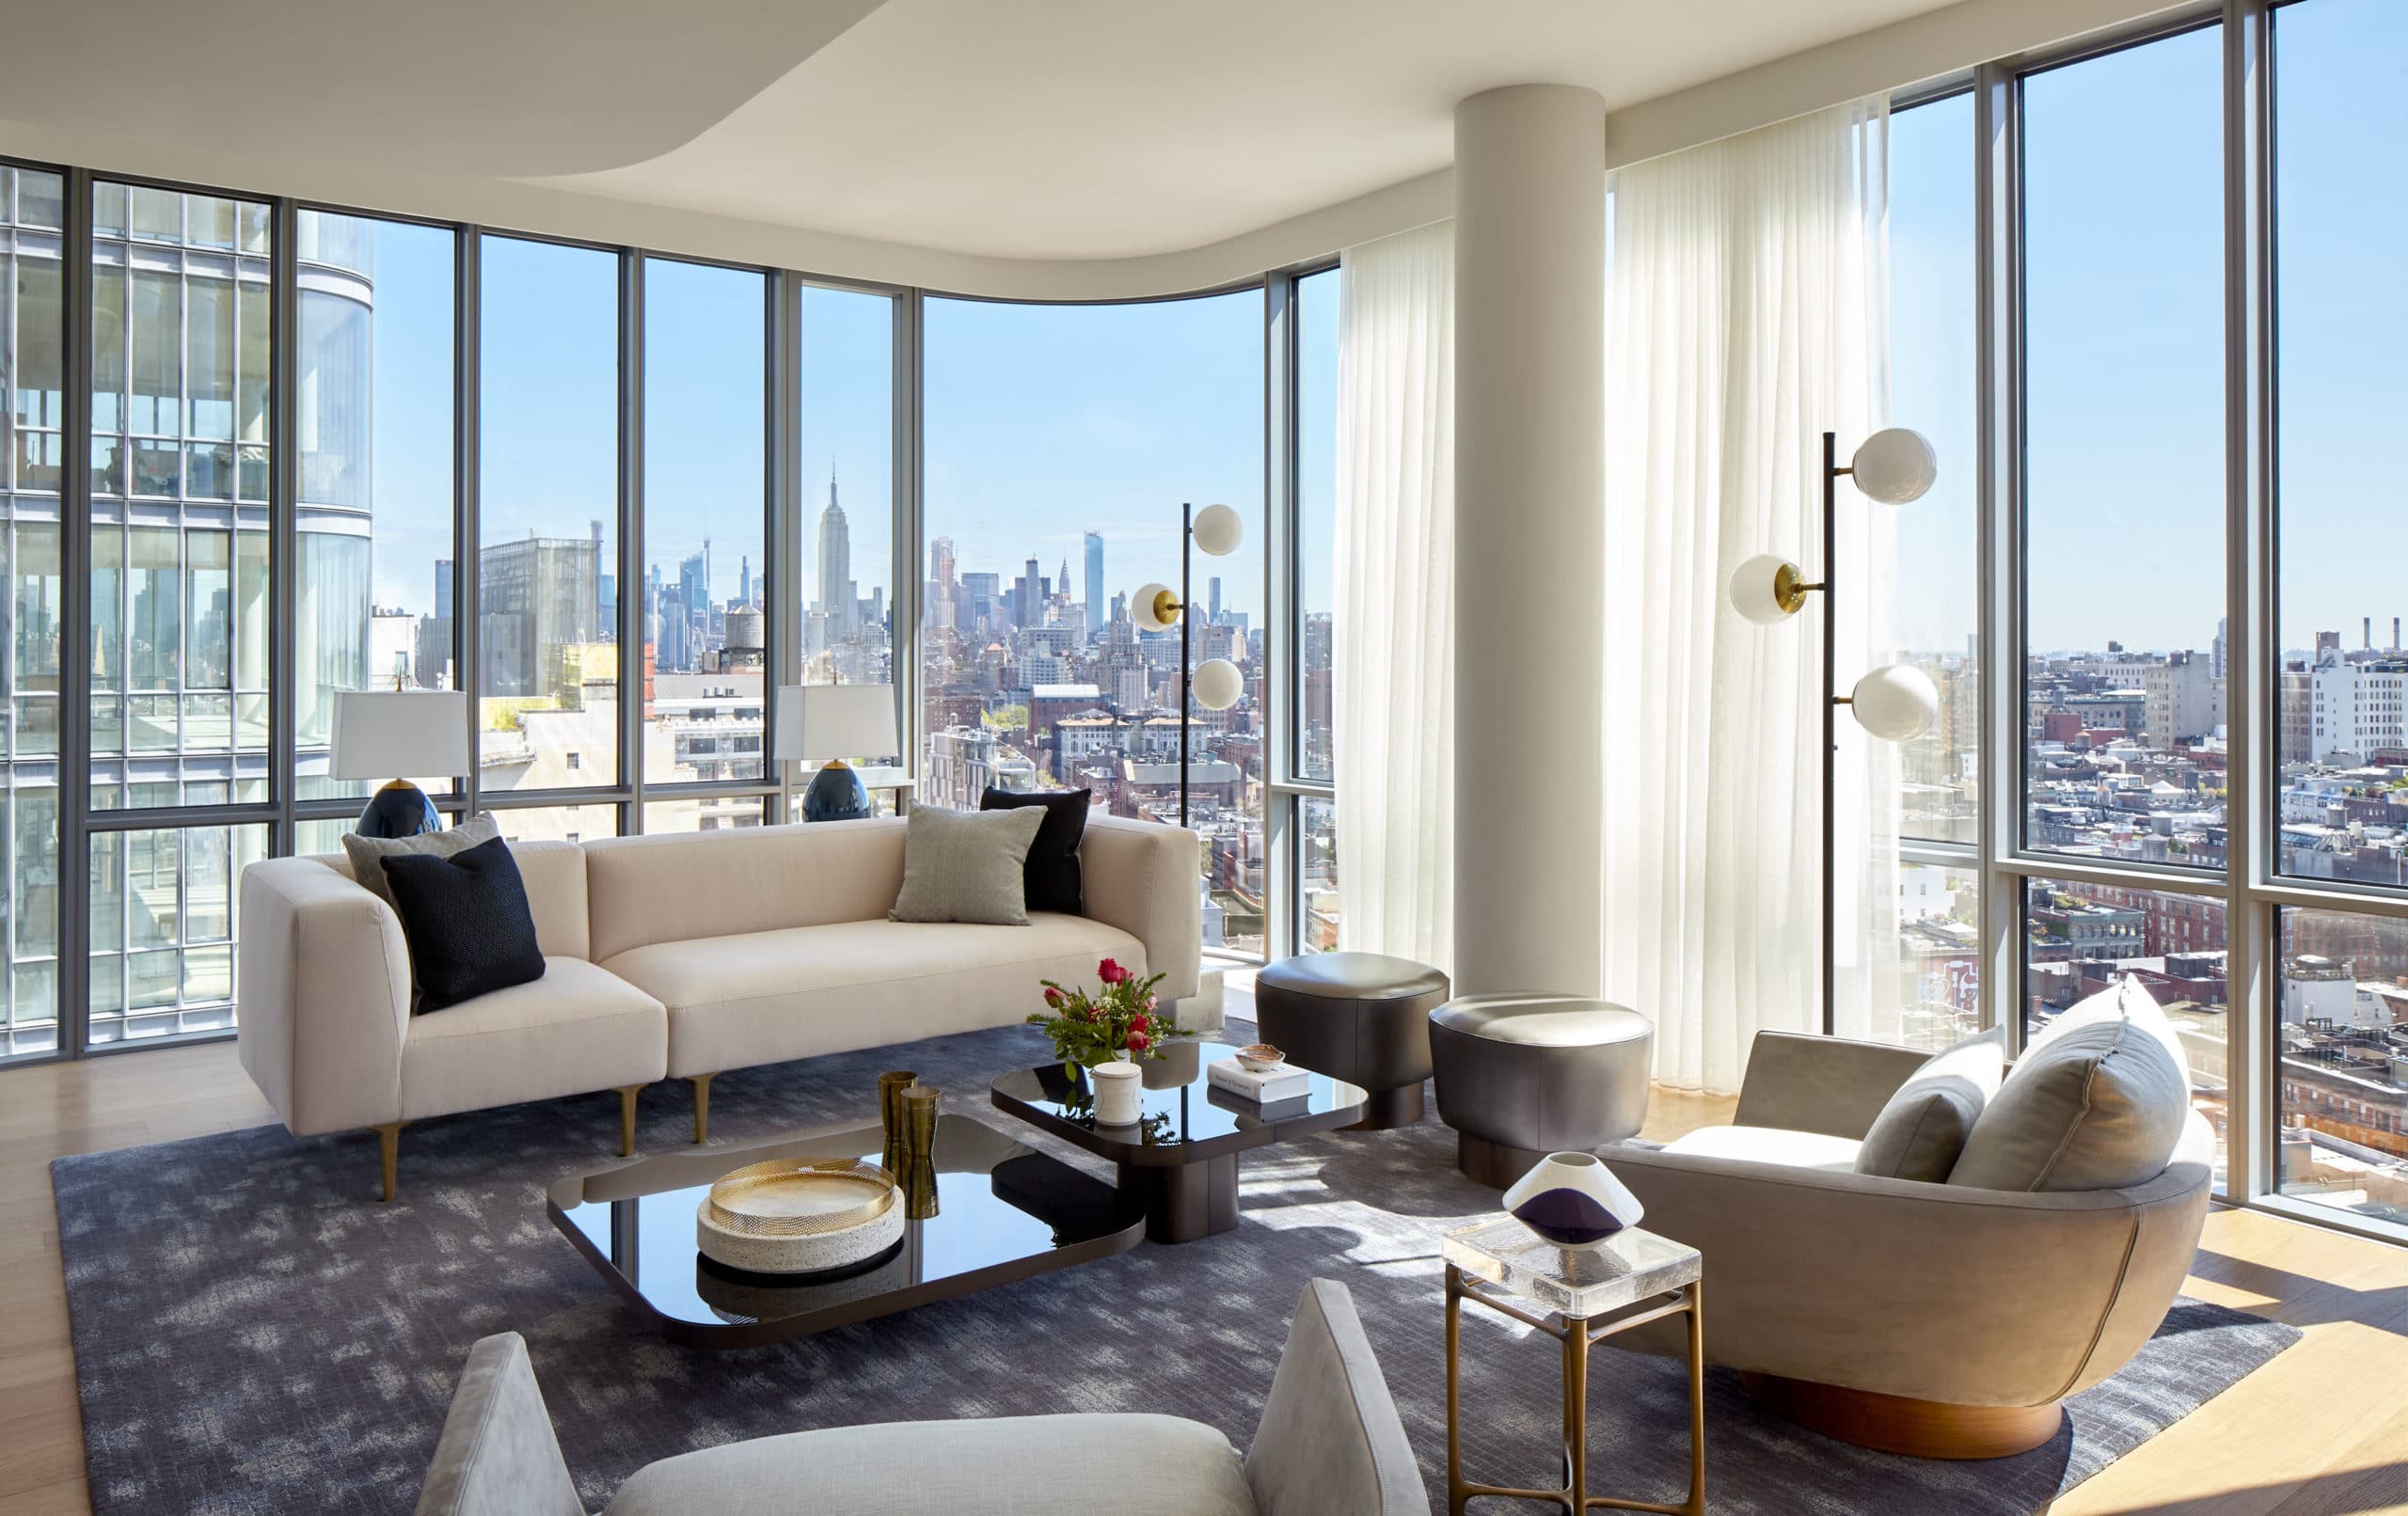 Interior view of 565 Broome residence living room with window view of New York City. Has full furniture and white walls.